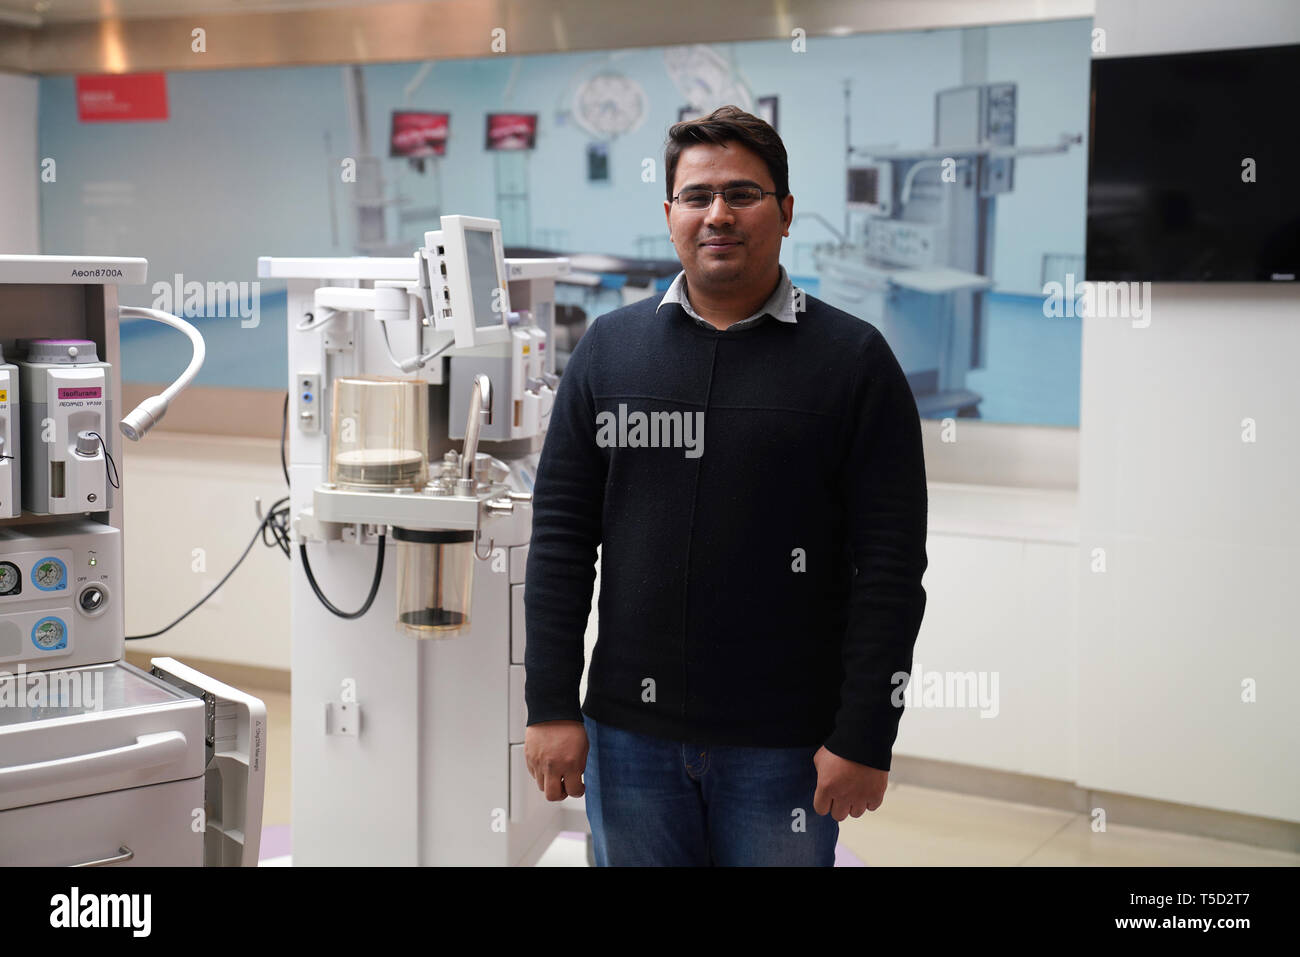 (190424) -- BEIJING, April 24, 2019 (Xinhua) -- Mohsin Ahmad from Pakistan stands in the product demonstration room of Beijing AeonMed Co., Ltd. where he works in Beijing, capital of China, April 4, 2019. Mohsin Ahmad, 27, came to study mechanical engineering in Beijing Institute of Technology in 2016. He became an after-sales engineer in AeonMed, responsible for the product maintenance for Asian-Pacific region. He got married with an Indonesian girl he met in China. He plans to stay in China for 10 years and then return to Pakistan or Indonesia. With the proposal of Belt and Road Initiative, Stock Photo